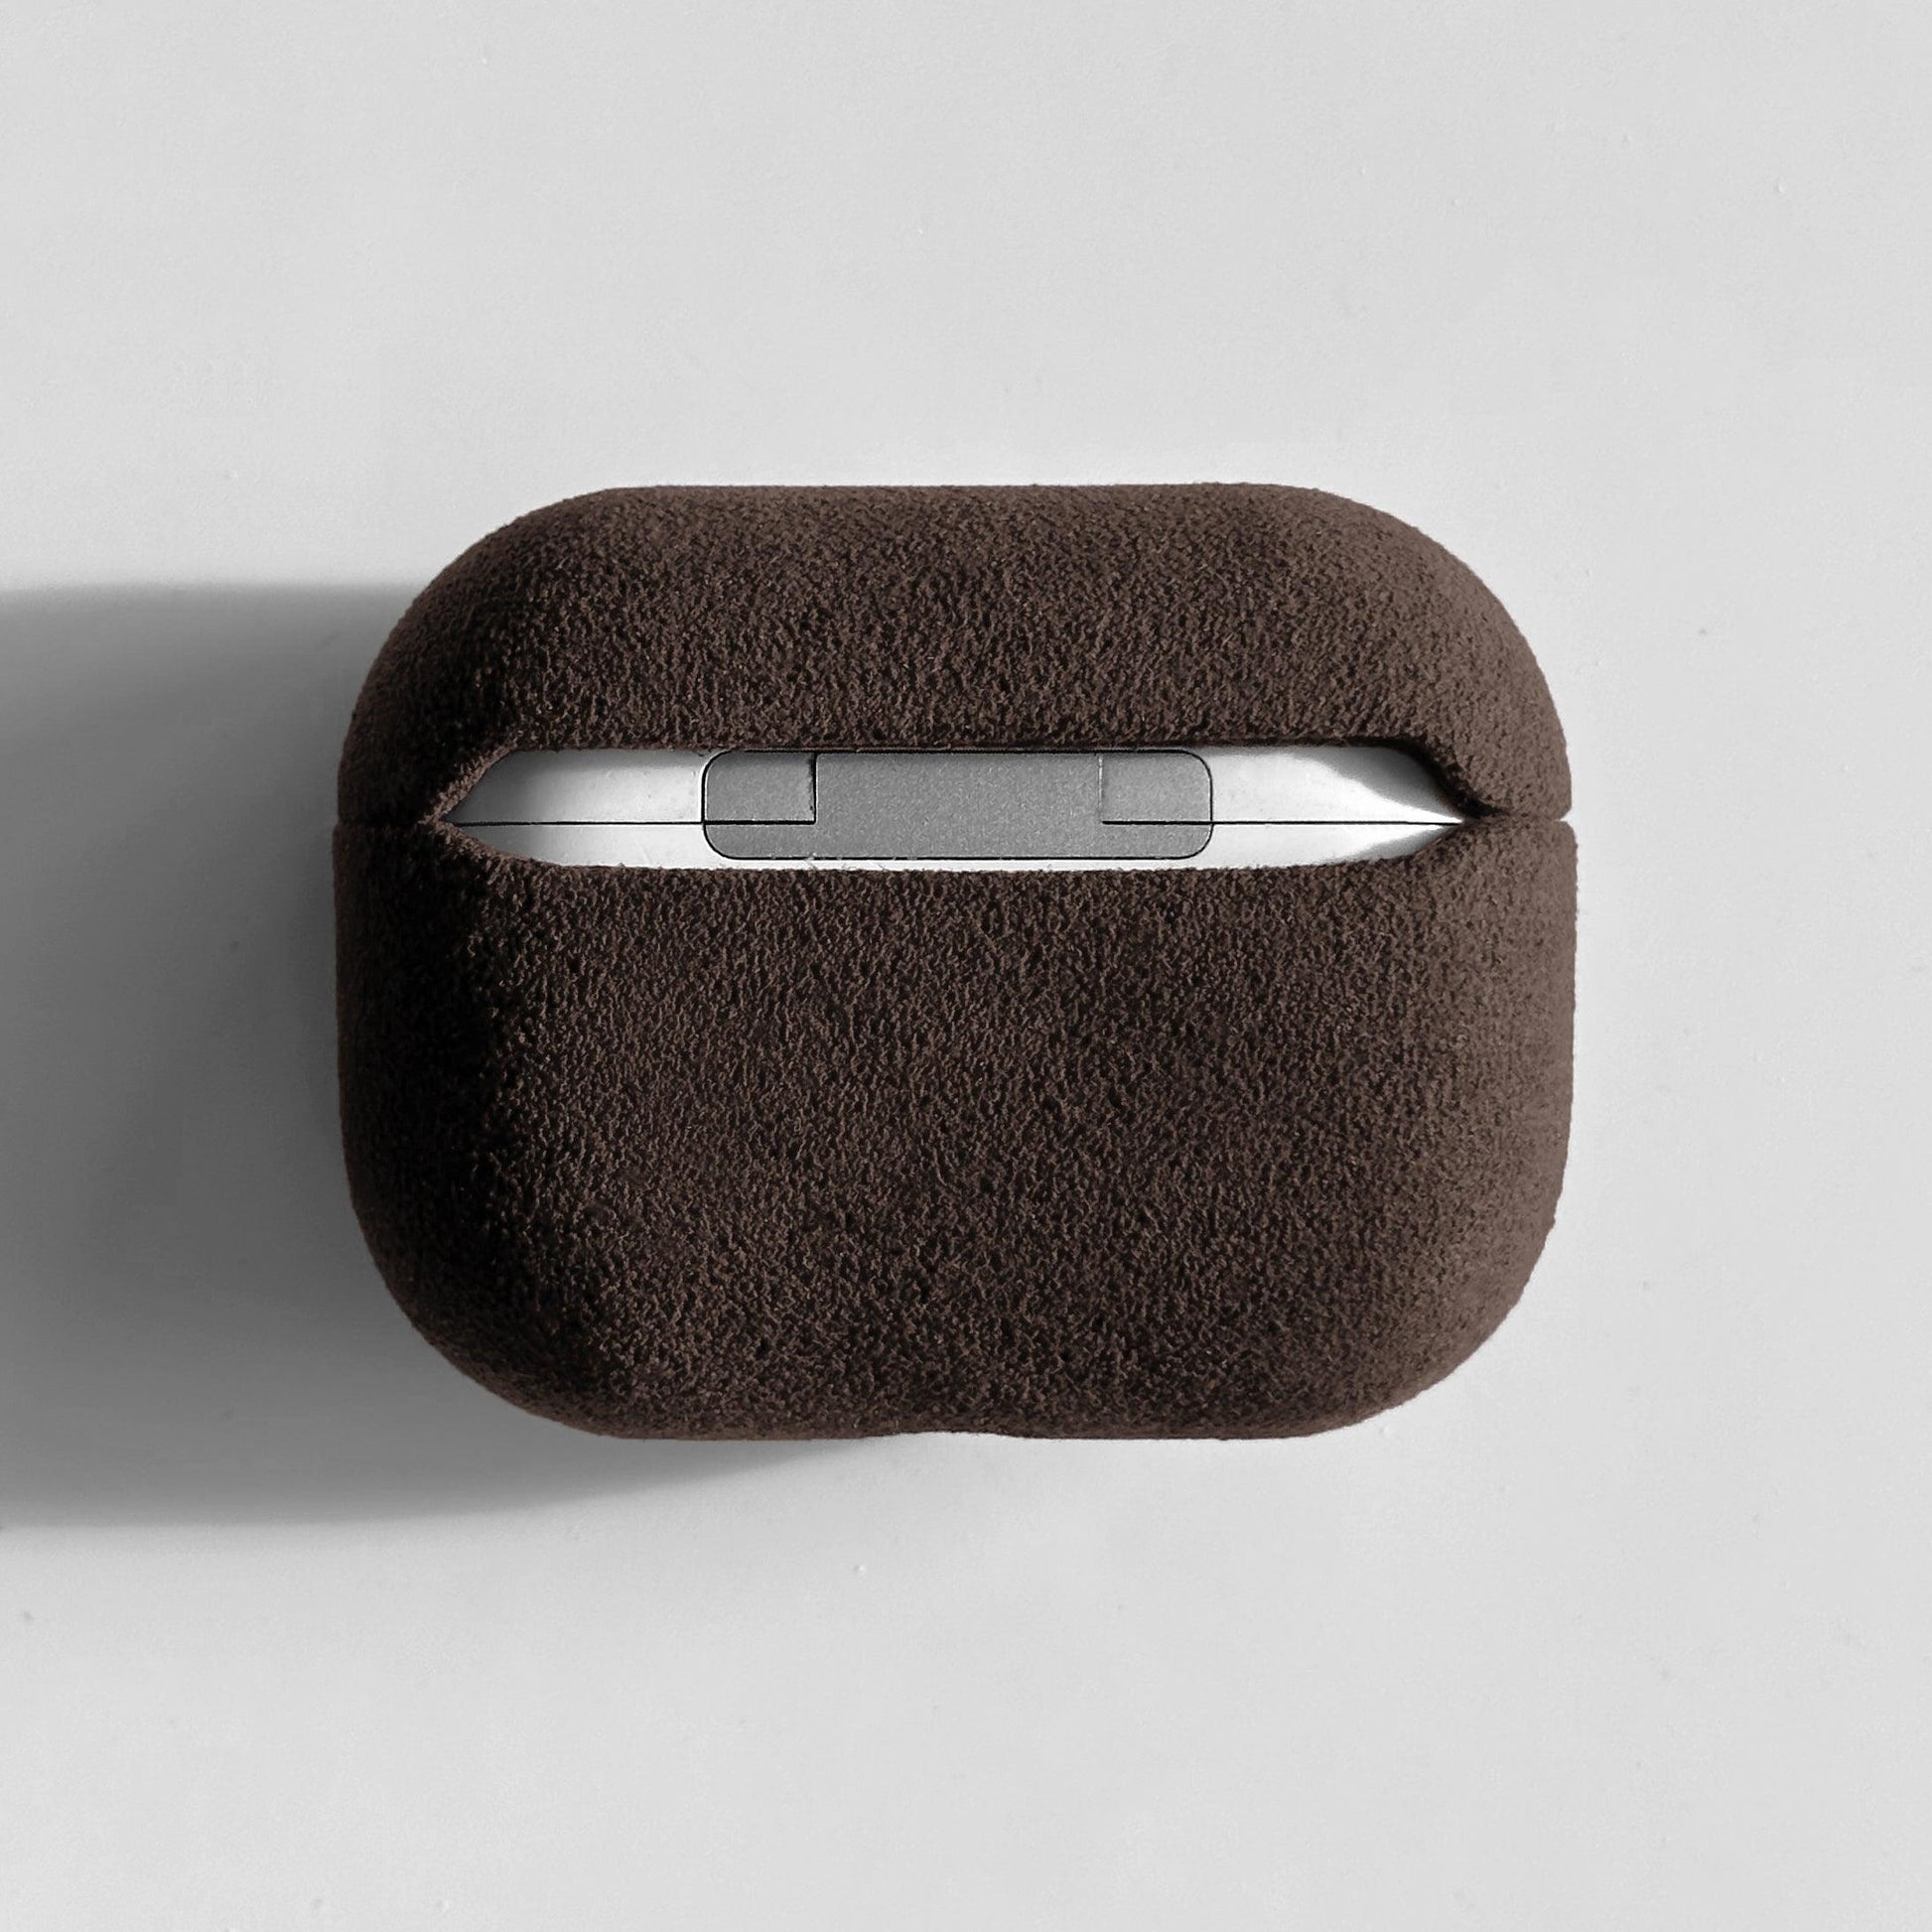 Alcantara Suede Leather iPhone Case and Accessories Collection - The AirPods Pro Case - Dark Brown - Luriax